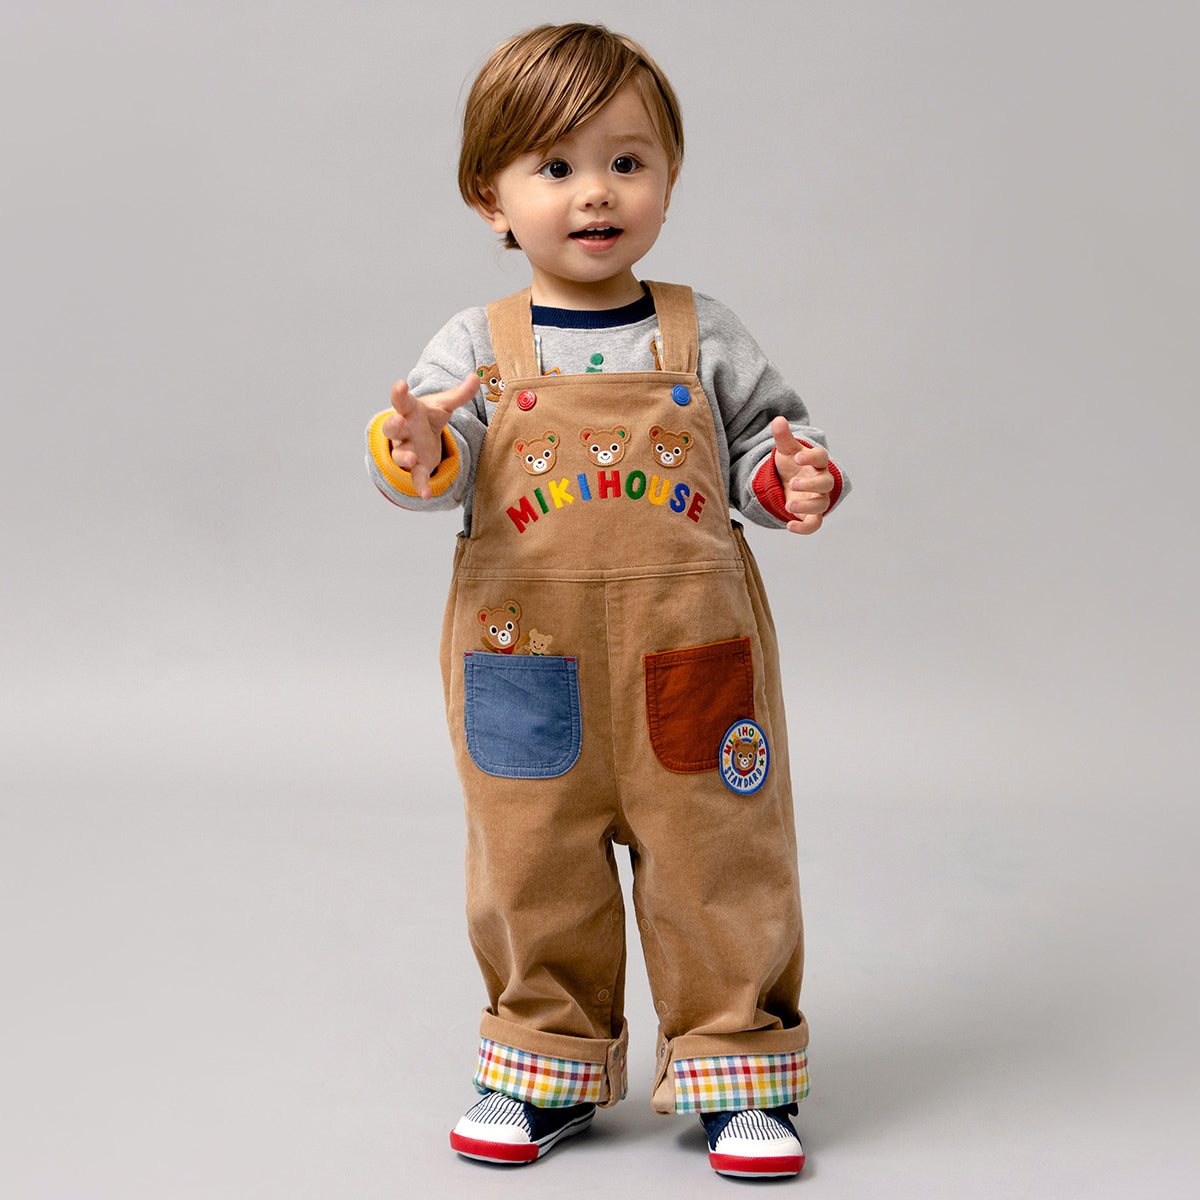 Pucci-Style Corduroy Overalls